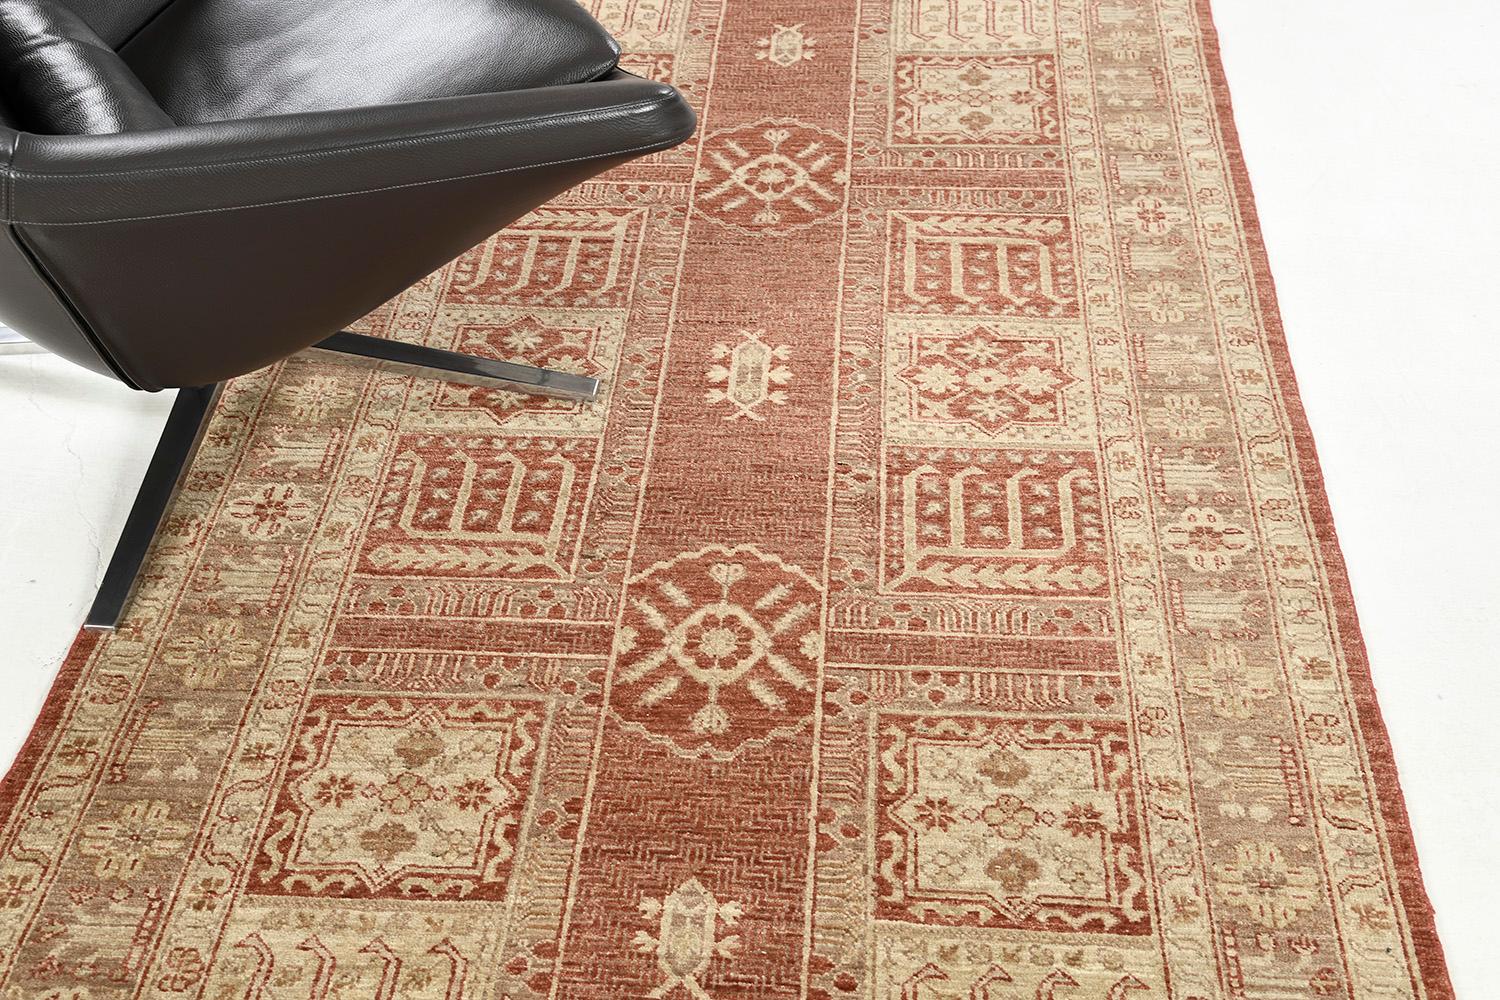 Behold and grab a glance at the charm of the runner from our sought-after re-created collection. Tones of the neutral palette on its core and tan borders have featured the outline details of Persian symbols. Elegant motifs are aligned at the center